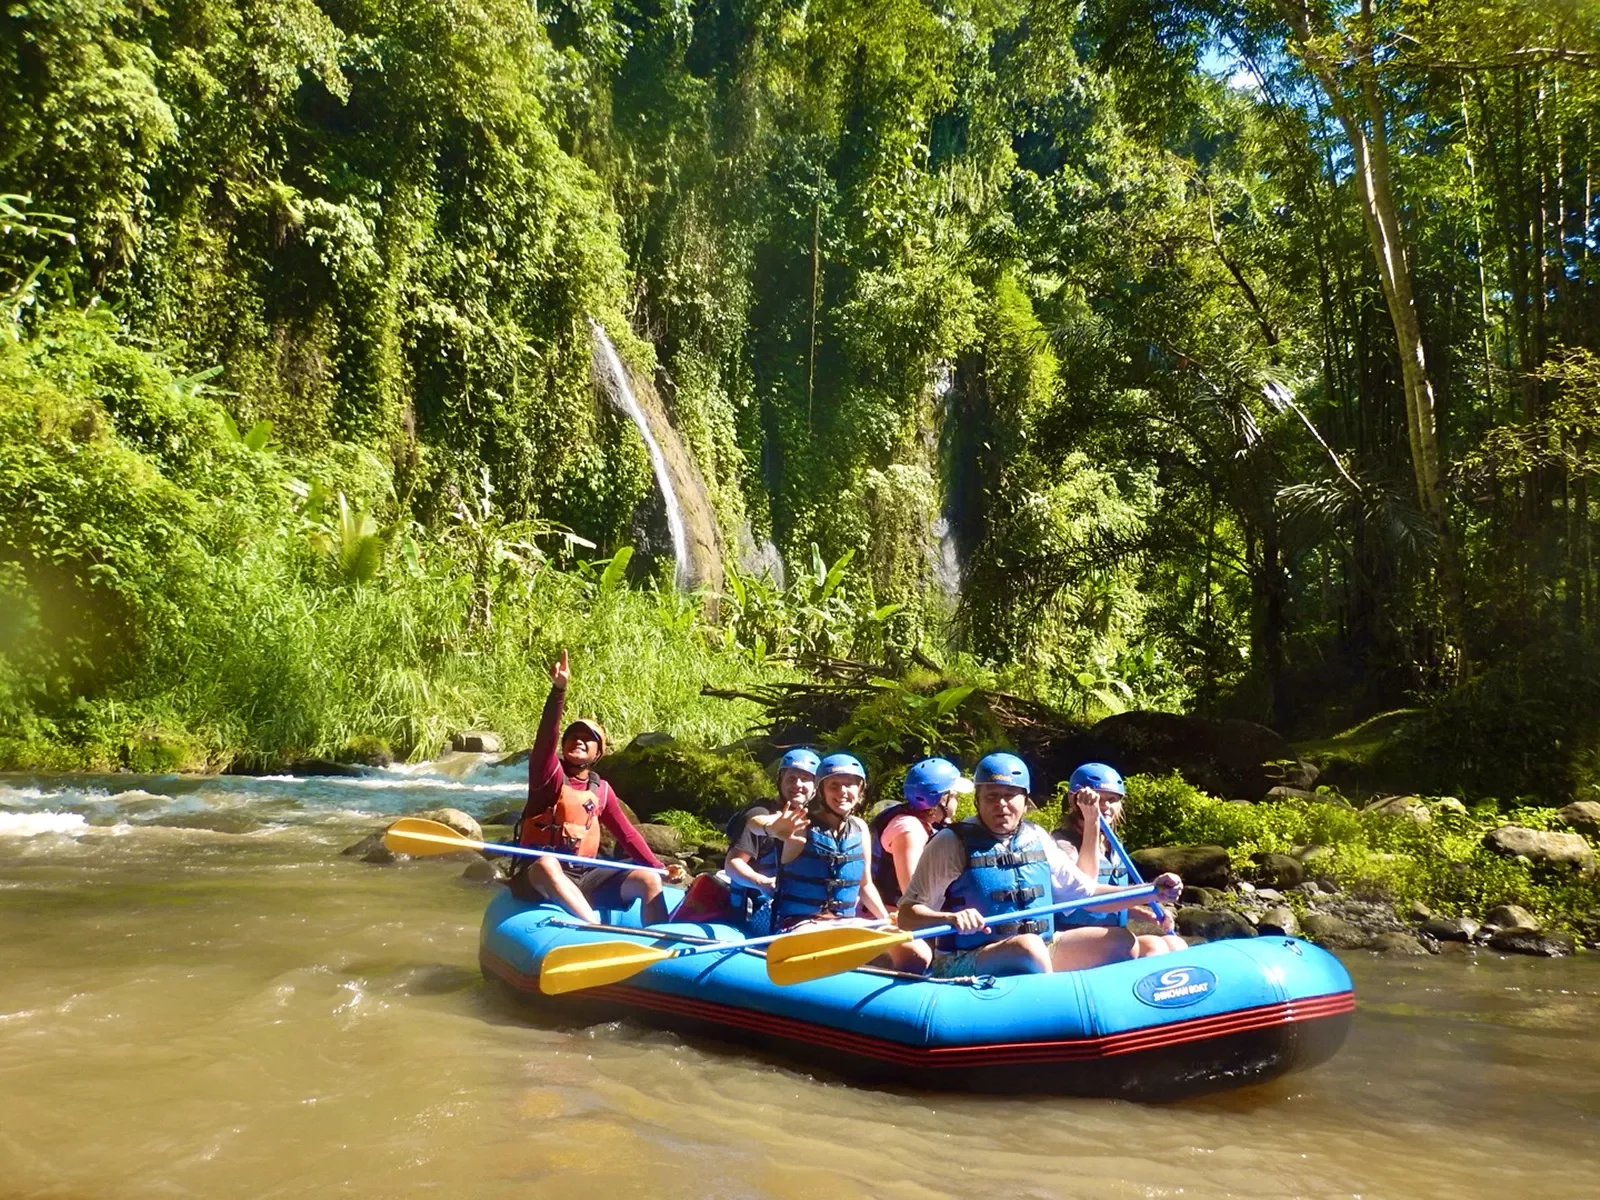 Raft with Backroads guests in river